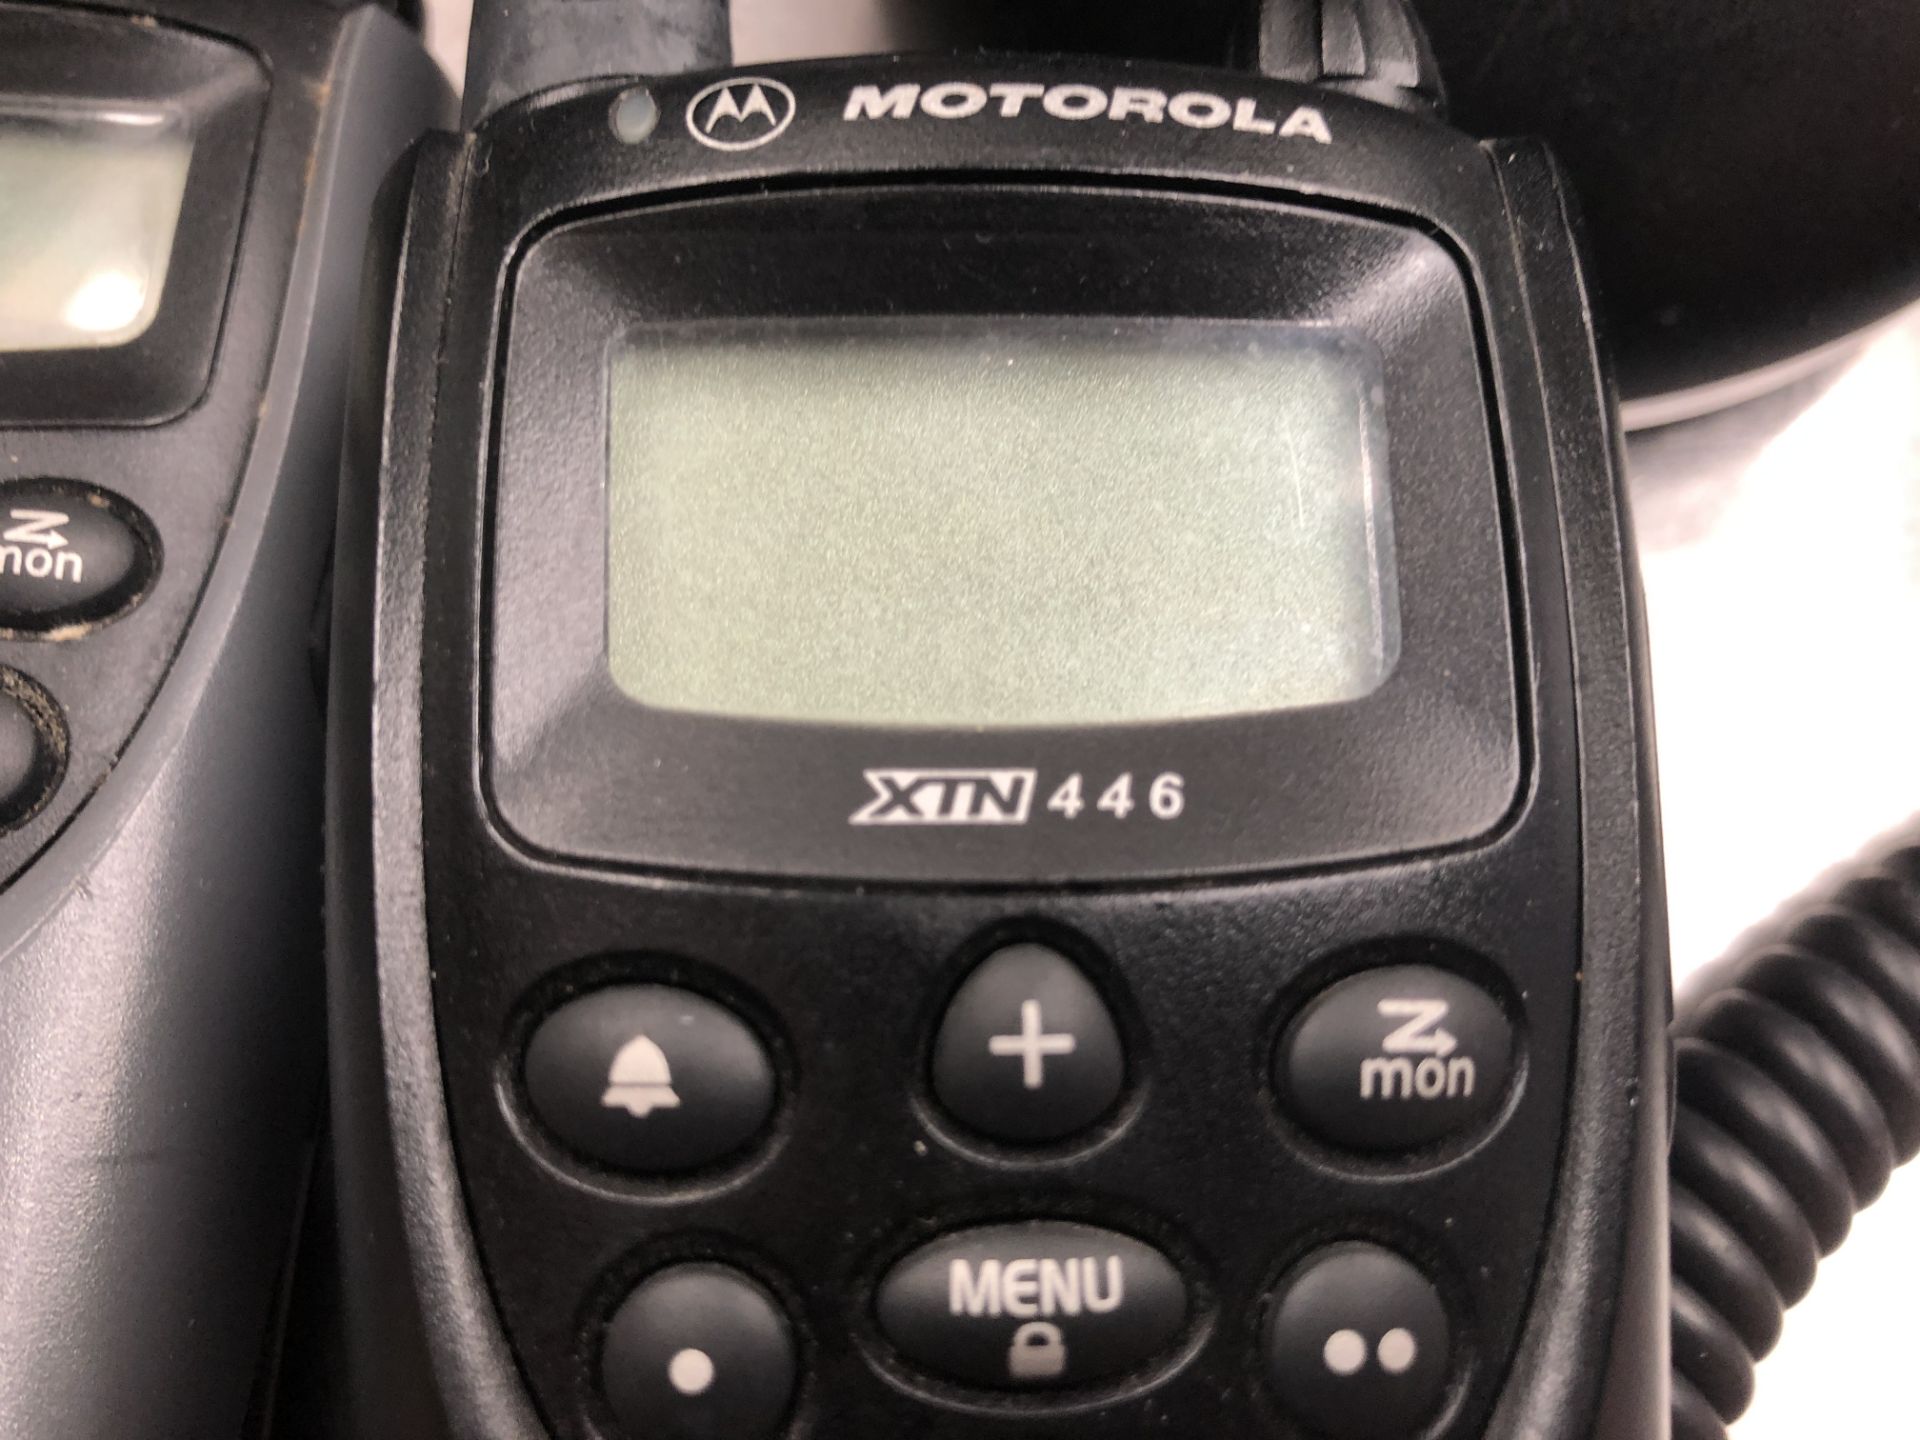 Motorola 4 x 2 Way Radios 2 x Charges, Manual and Case - Image 5 of 7